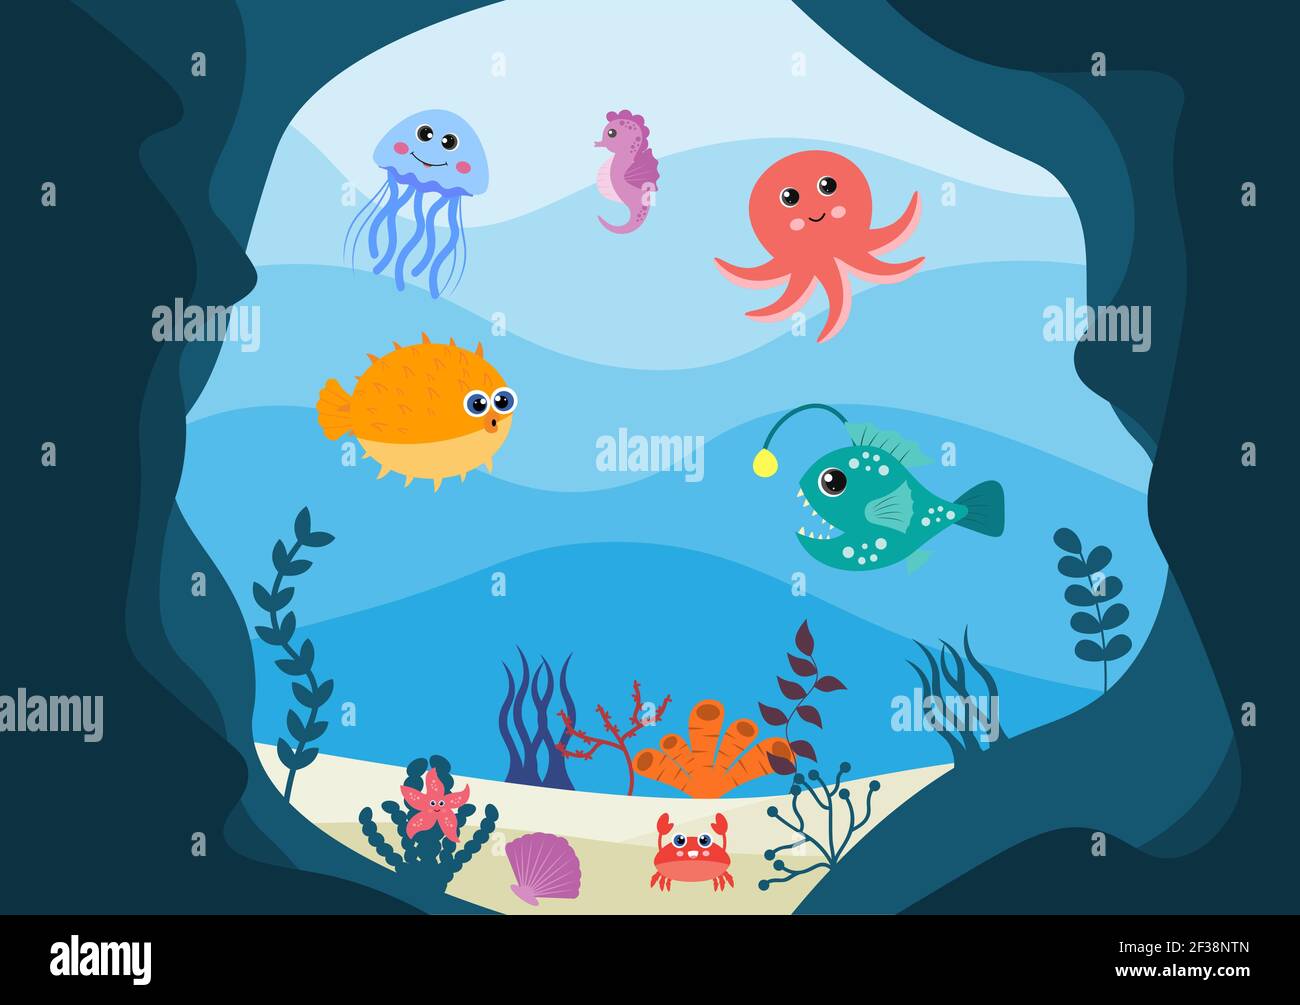 Underwater Scenery and Cute Animal Life in the Sea with Seahorses, Starfish, Octopus, Turtles, Sharks, Fish, Jellyfish, Crabs Design. Vector Illustrat Stock Vector